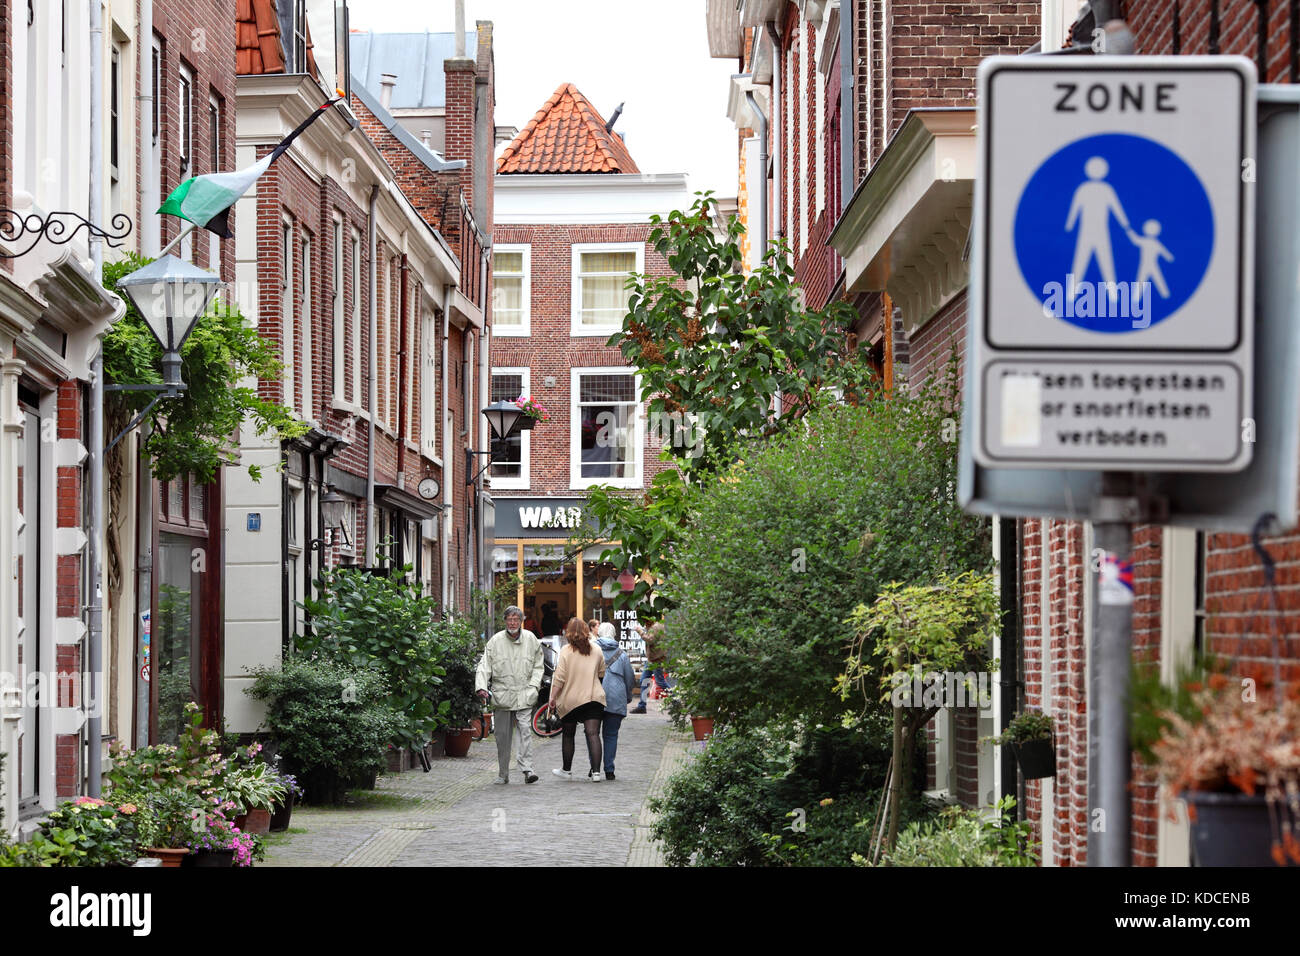 A blue 'pedestrian zone' sign indicates a traffic-free back street in Haarlem, North Holland, The Netherlands. Stock Photo